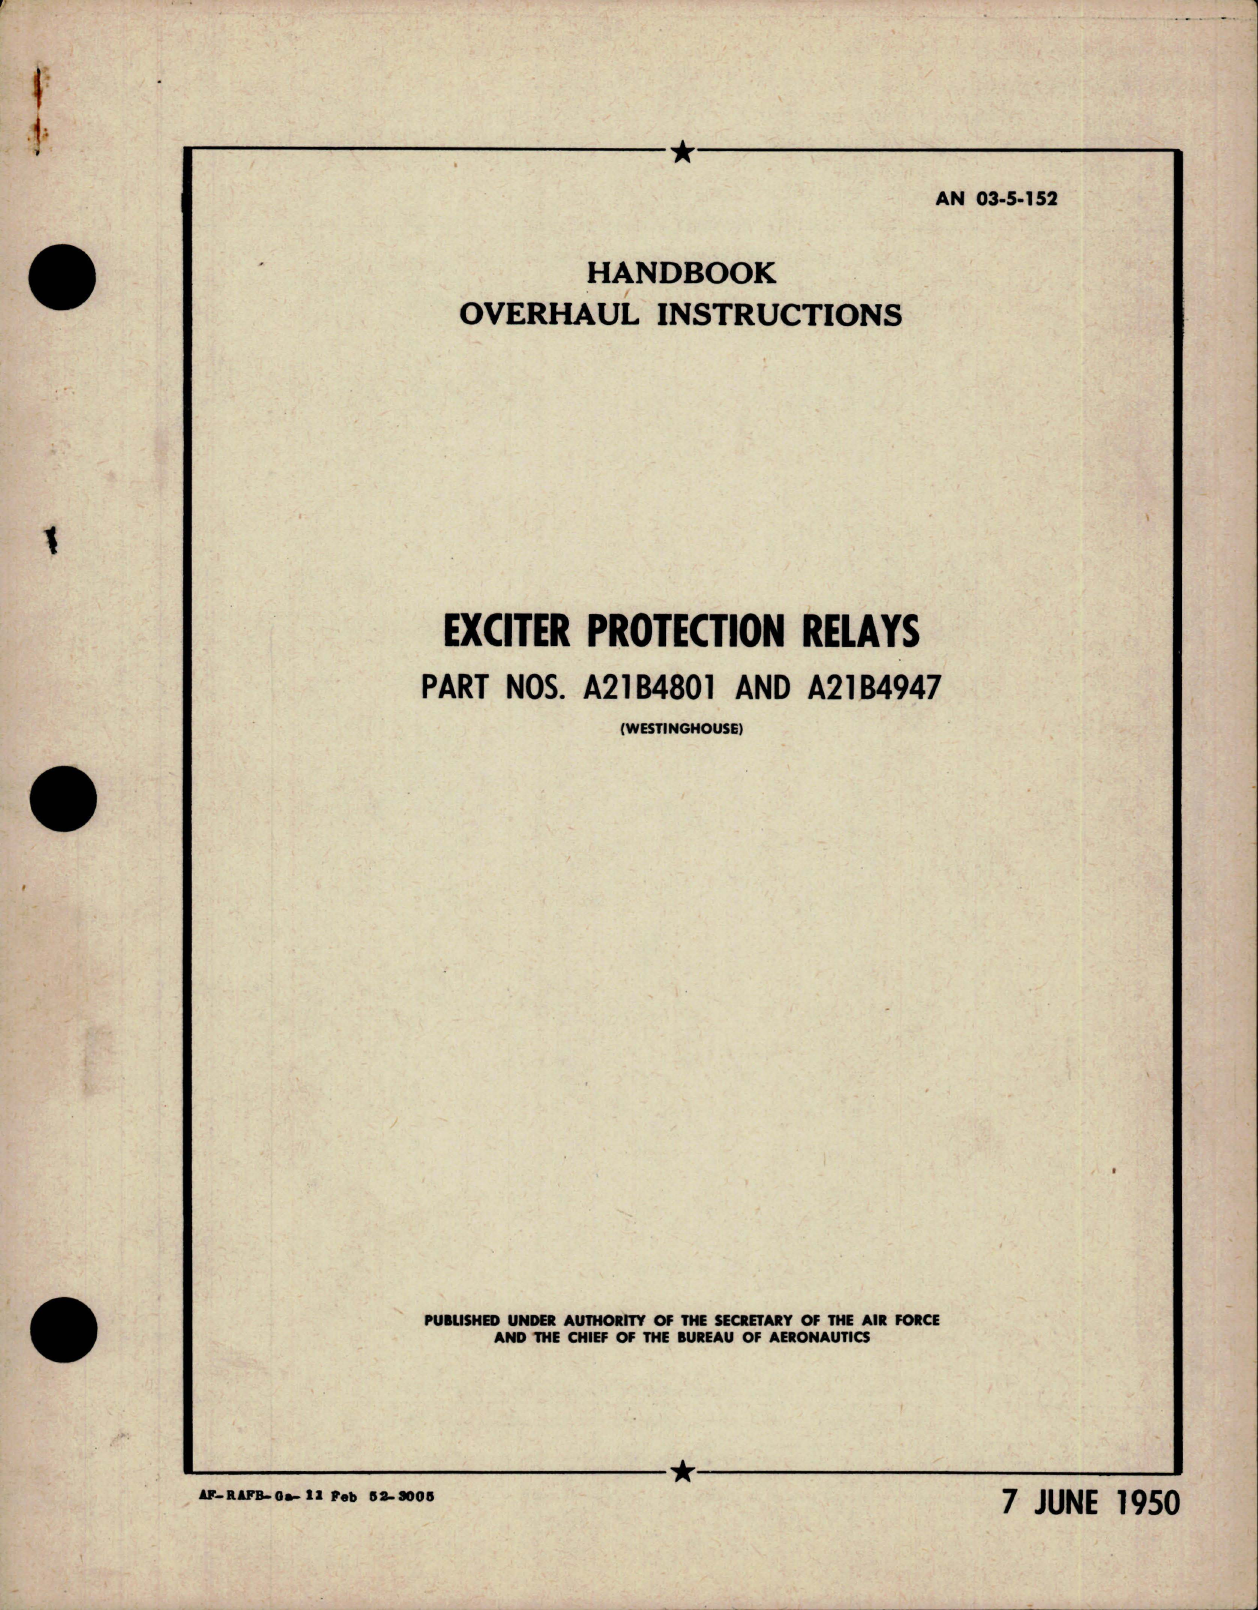 Sample page 1 from AirCorps Library document: Overhaul Instructions for Exciter Protection Relays - Parts A21B4801 and A21B4947 